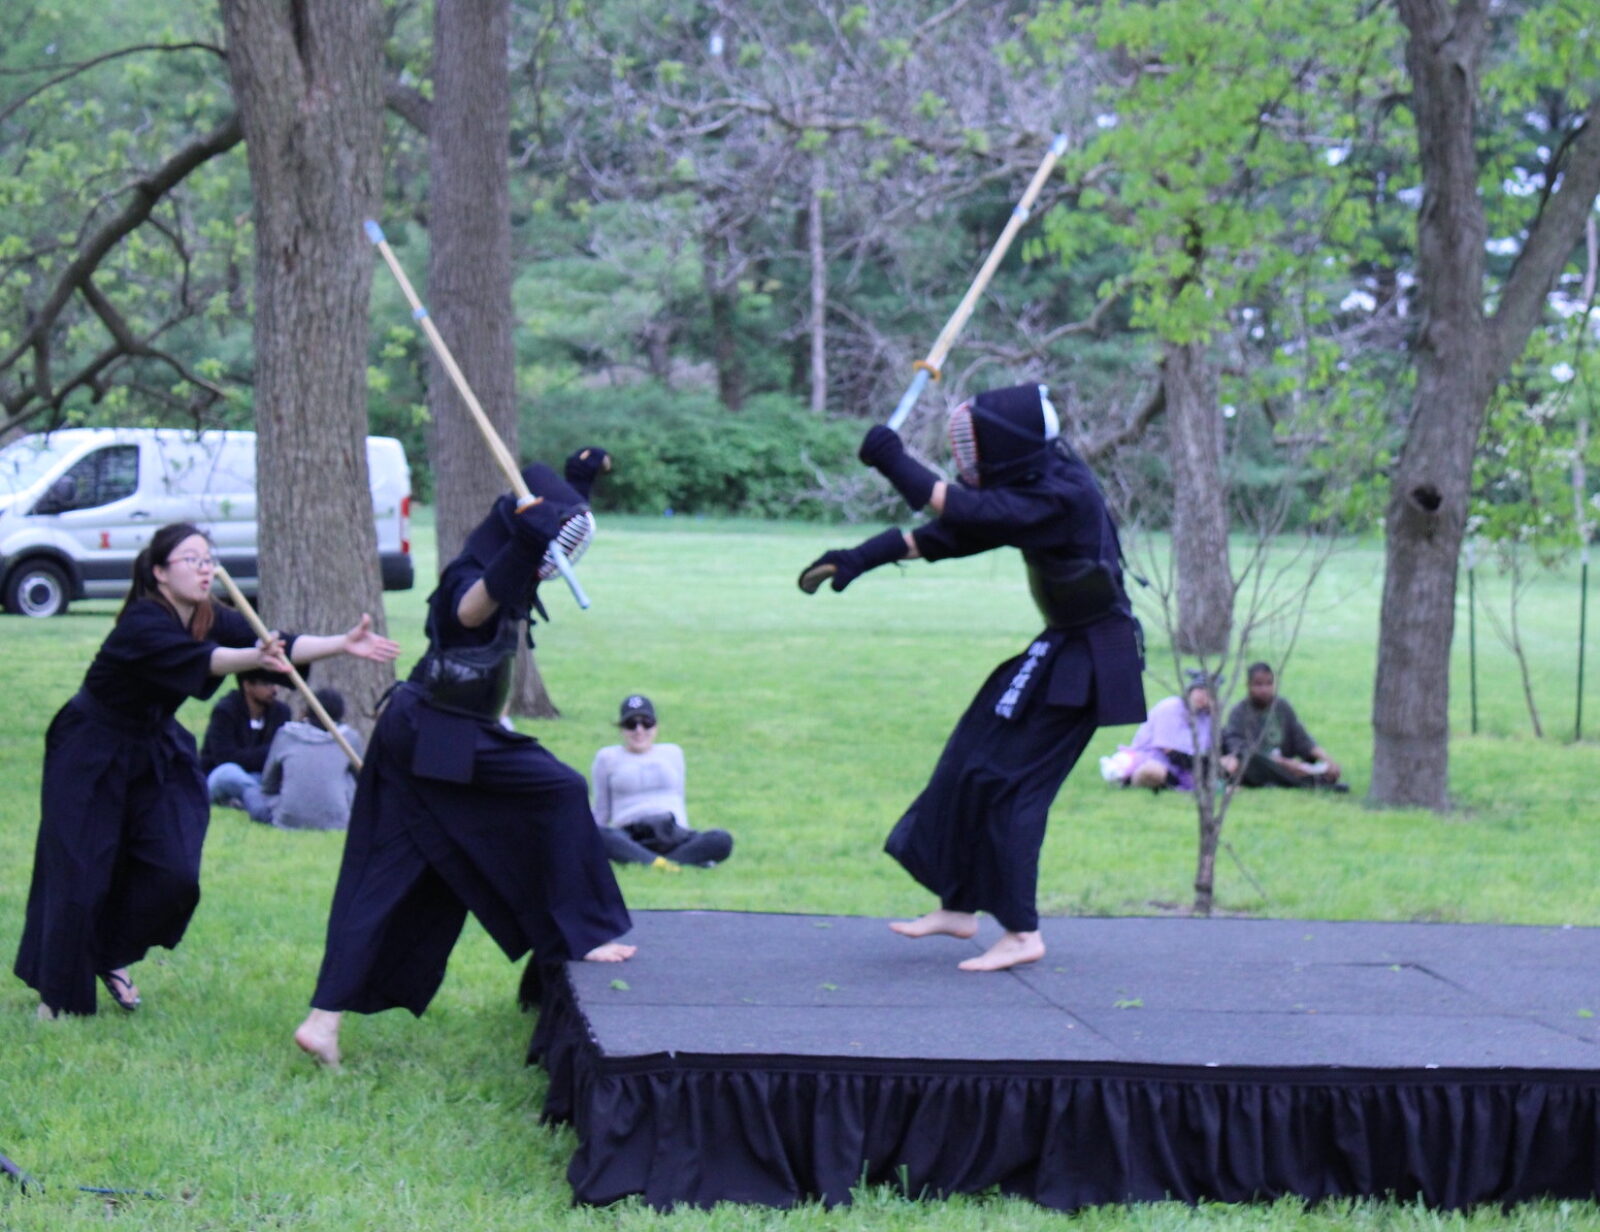 2 people fighting with wooden swords on stage